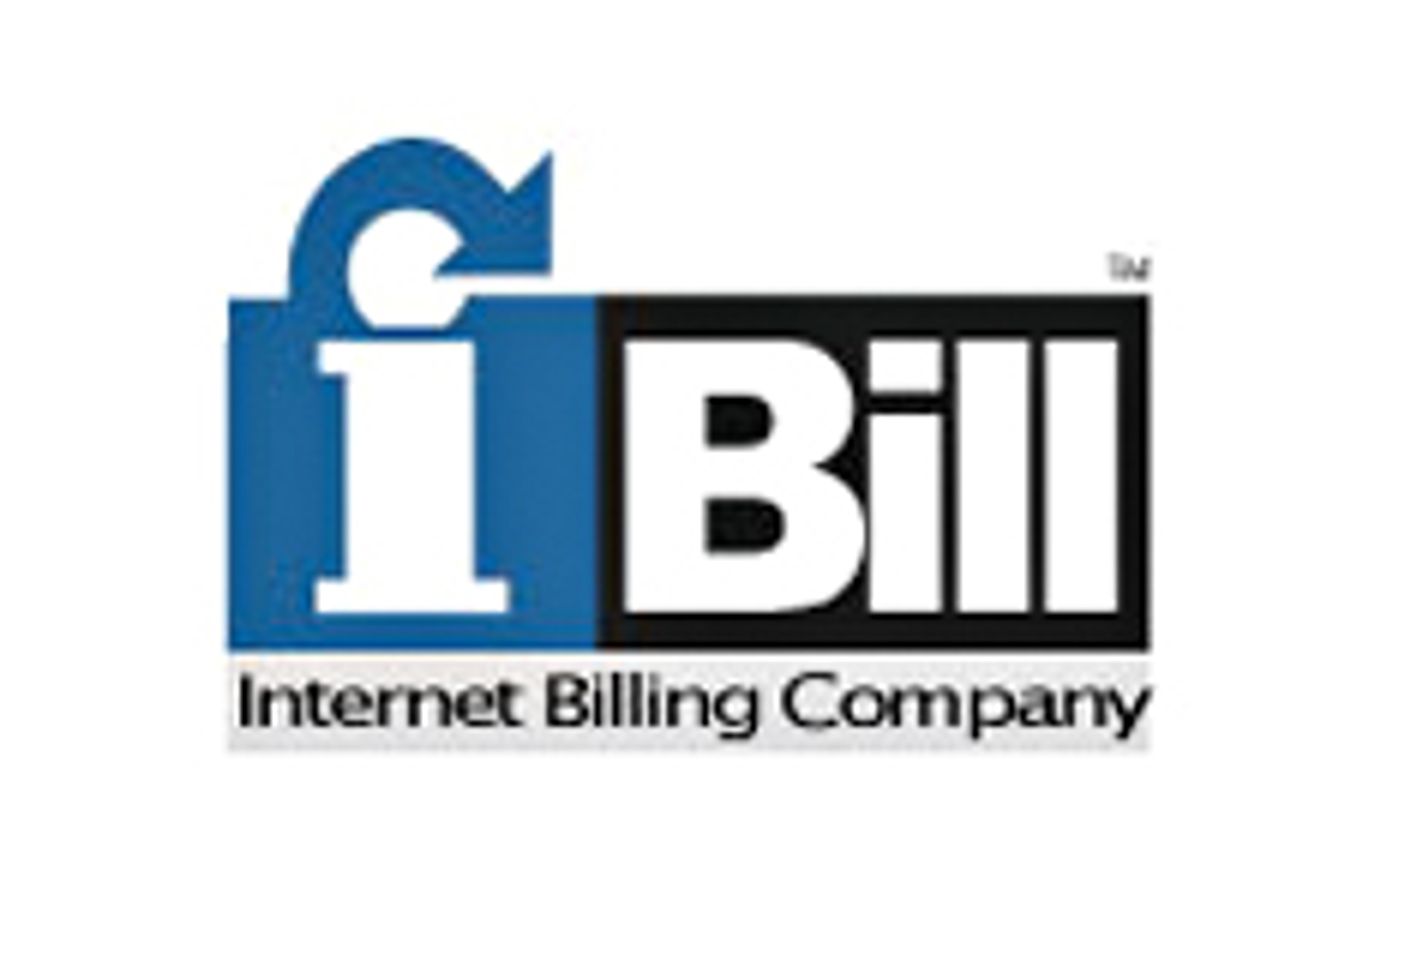 iBill Says it Will Pay Off Previous Company's Promissory Notes